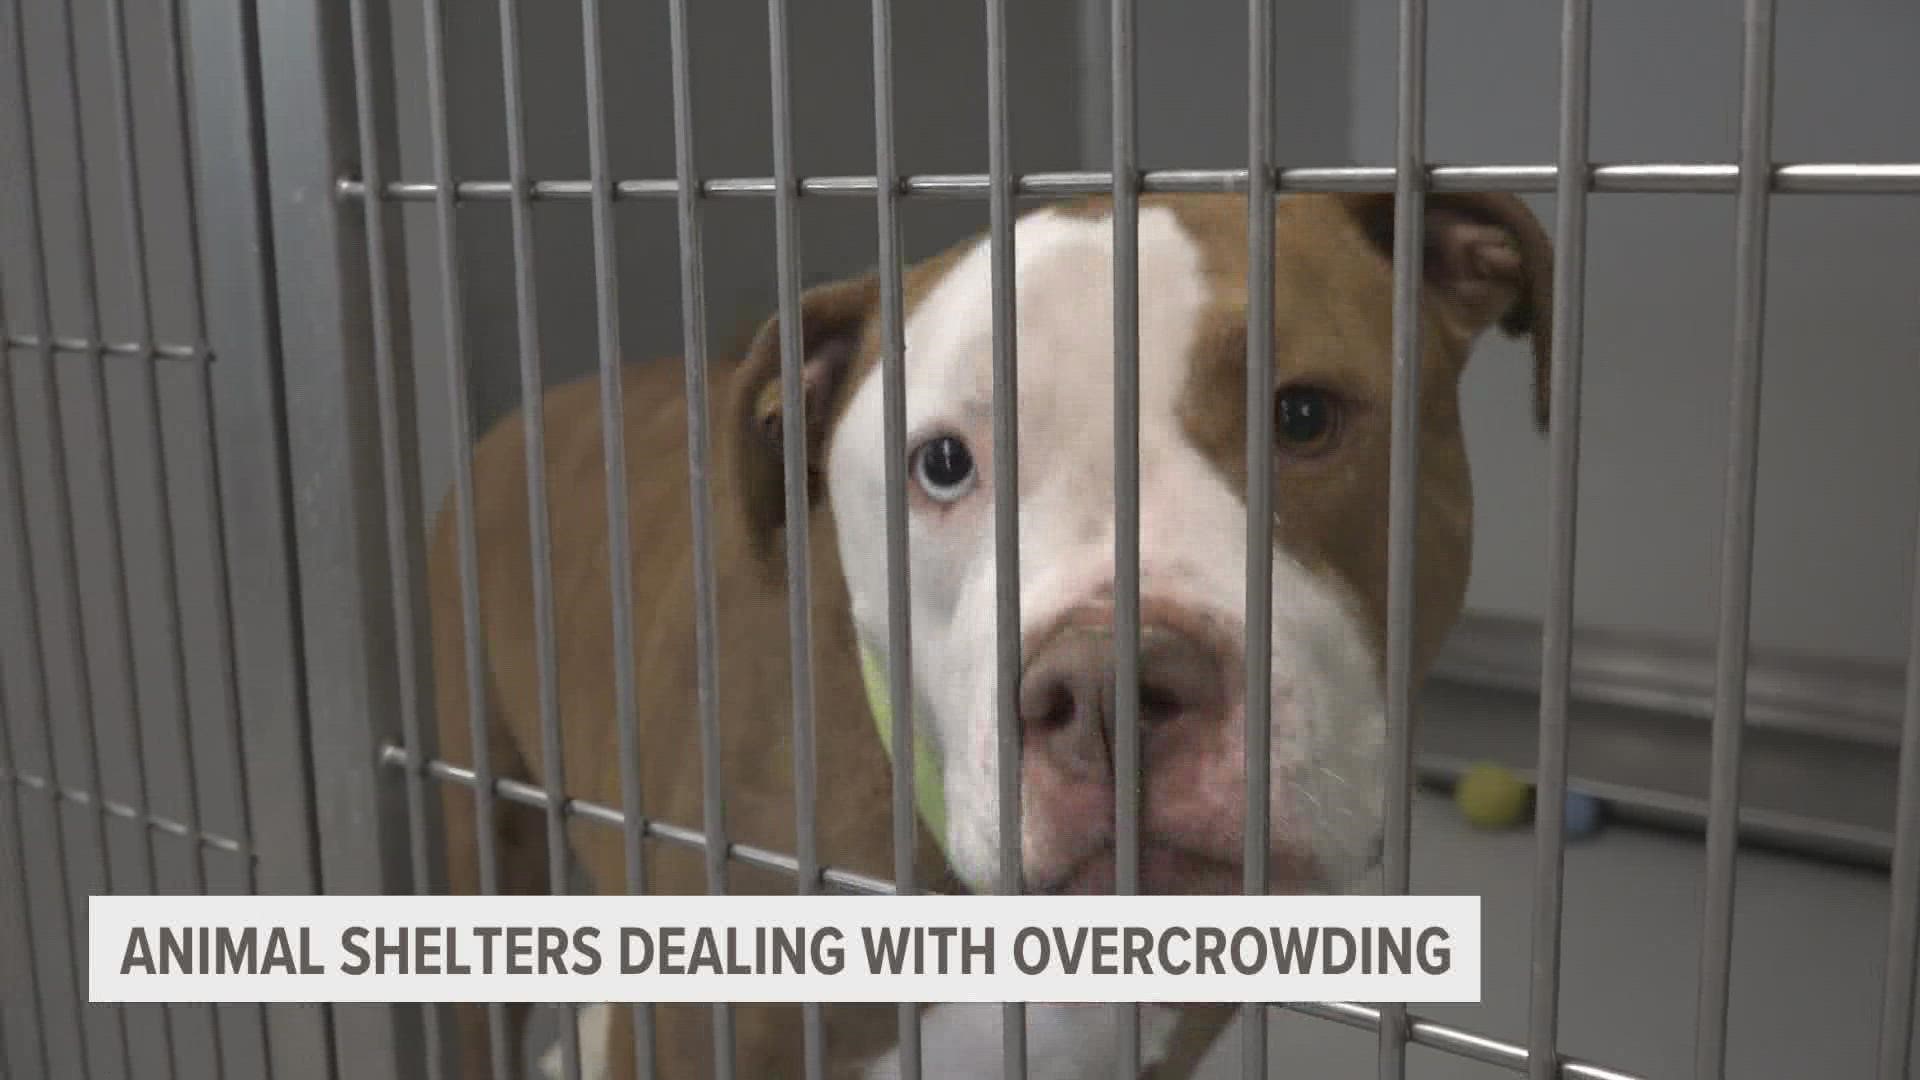 Animal shelters deal with overcrowding as pet intake increases 